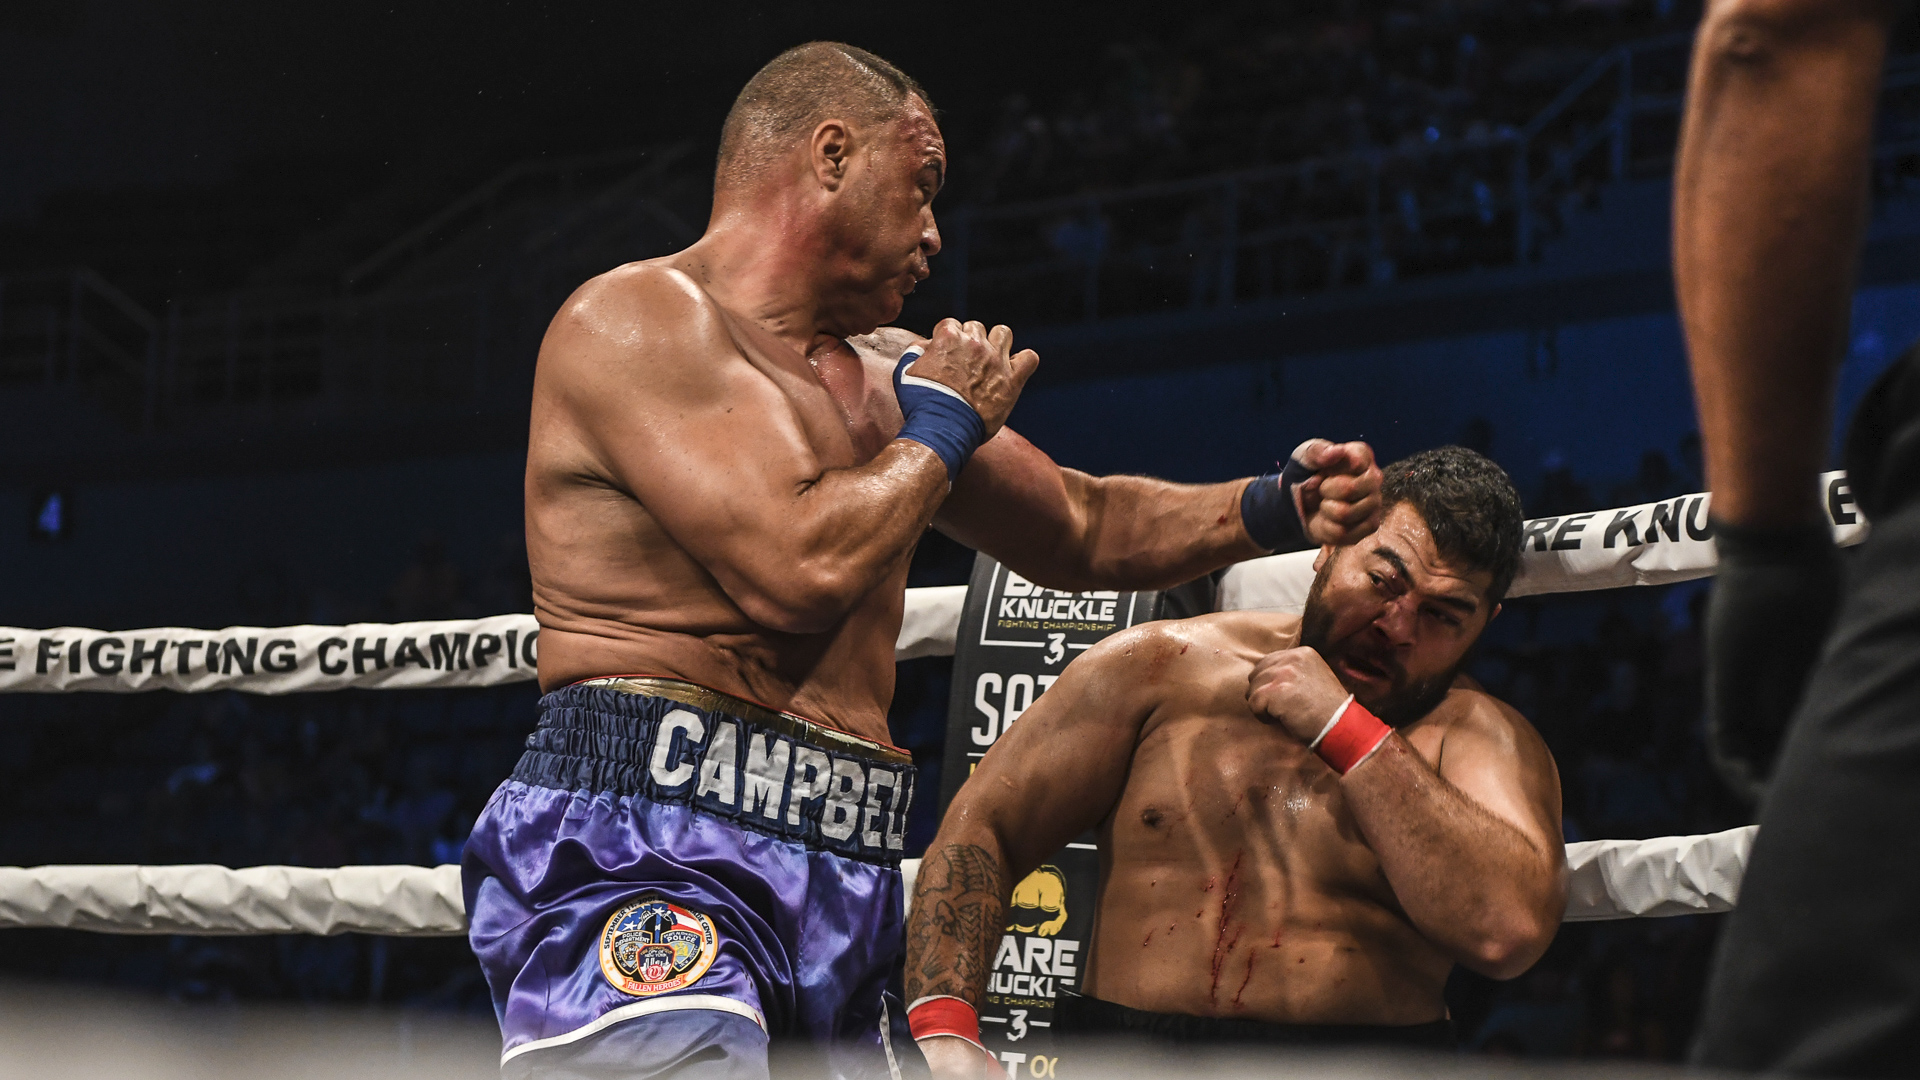 Watch Bare Knuckle Fighting Championship Live Streaming Events